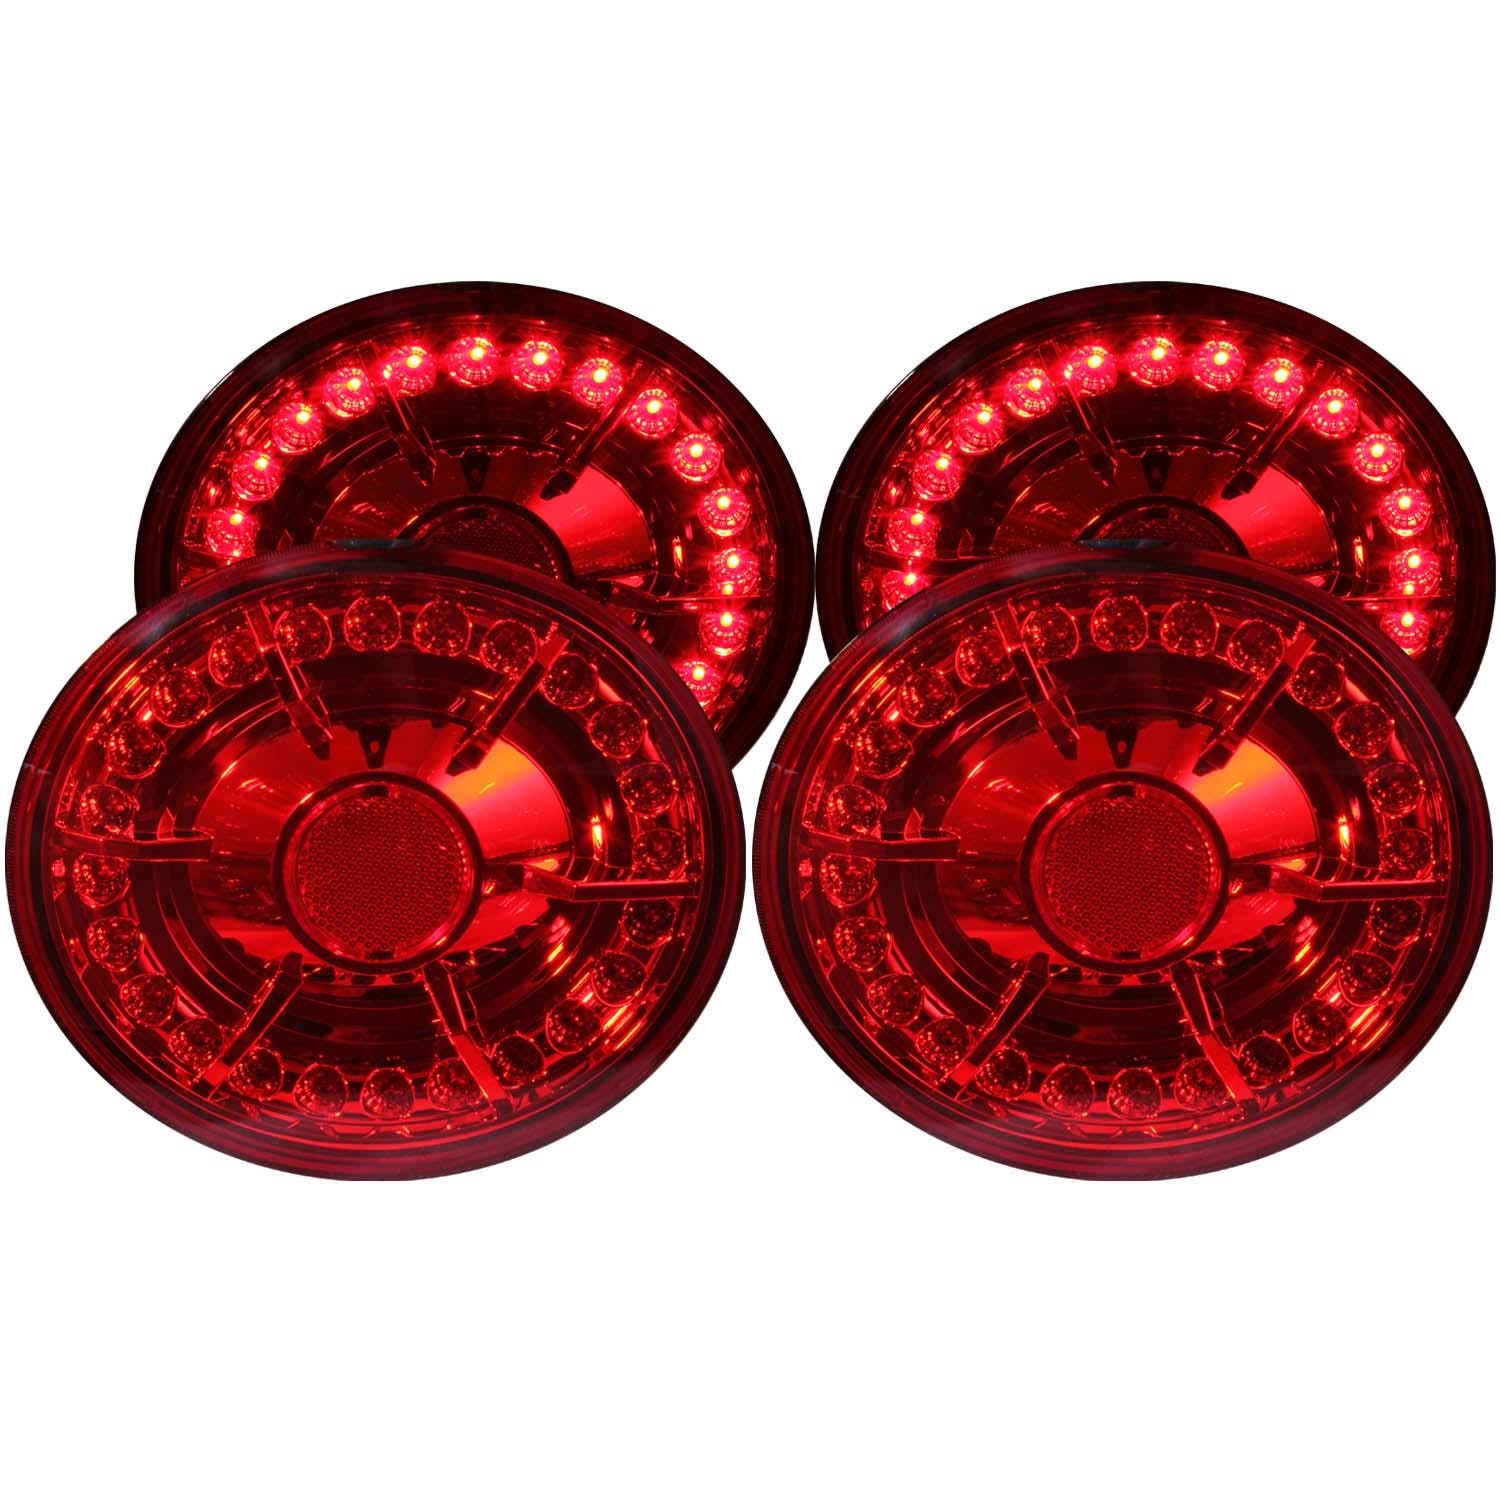 AnzoUSA 321168 LED Taillights Red 4pc